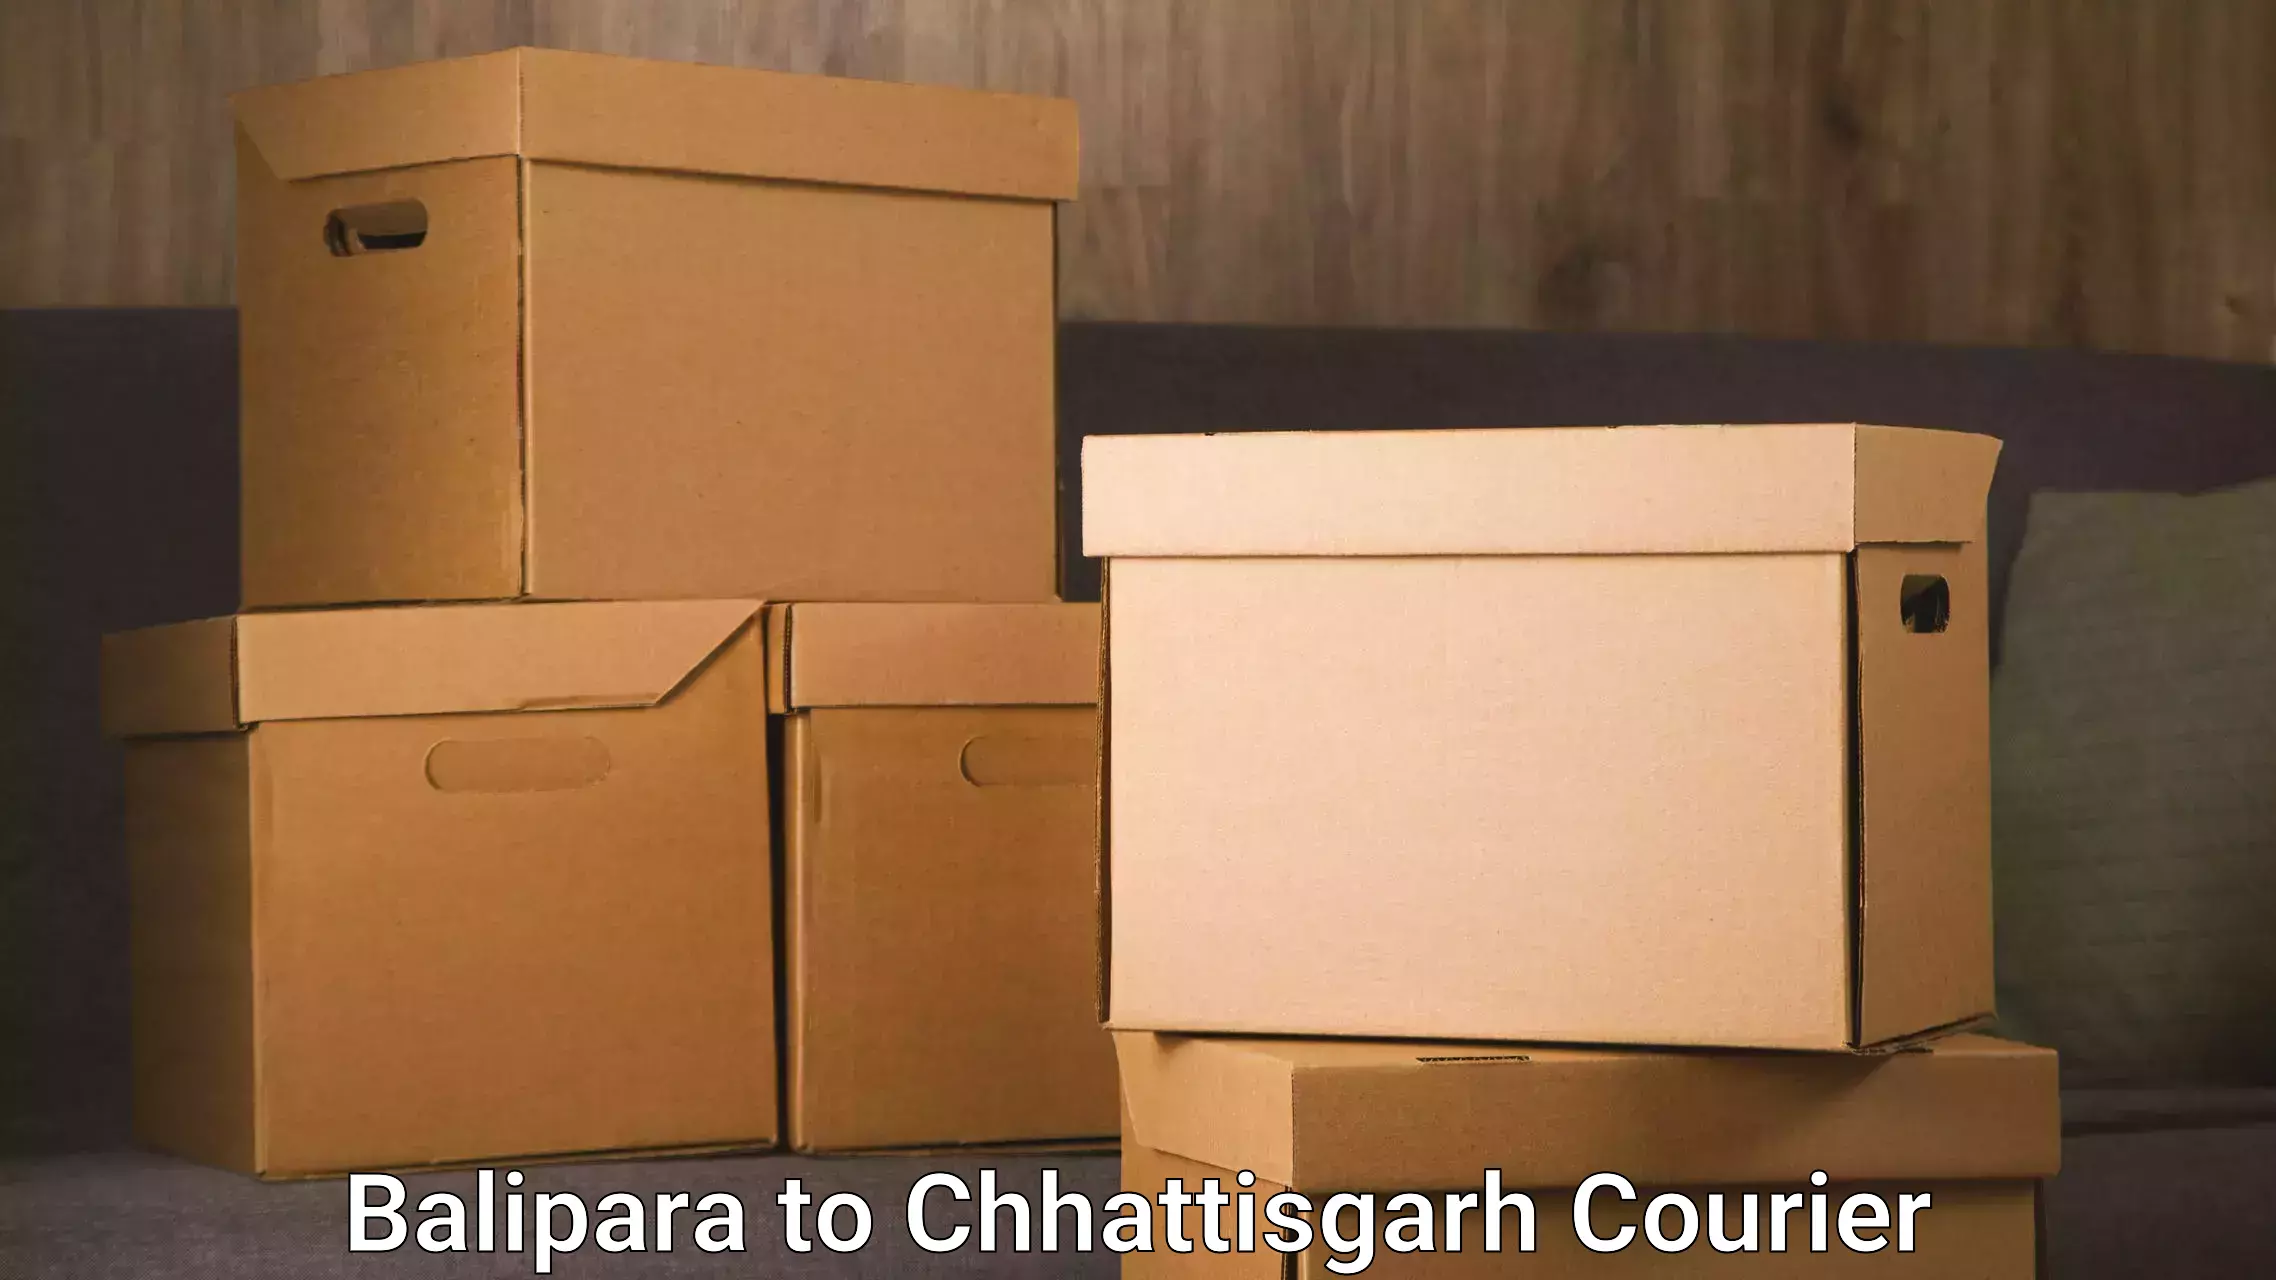 Quick dispatch service in Balipara to Dongargarh